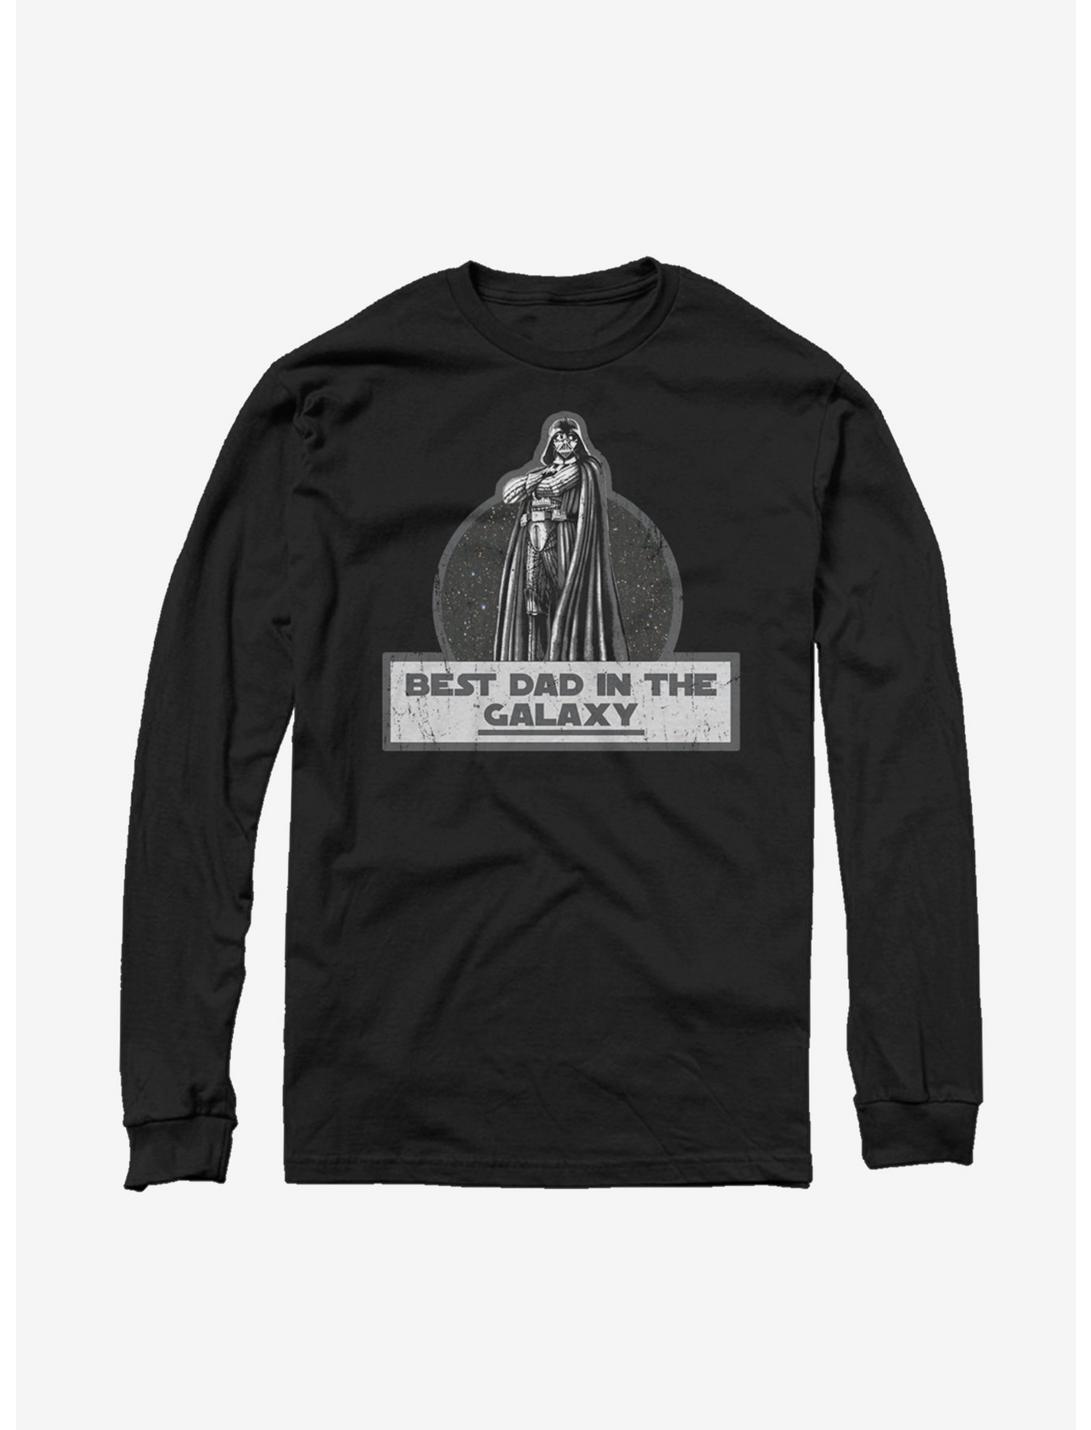 Star Wars Vader Best Dad in the Galaxy Long Sleeve T-Shirt - BLACK ...